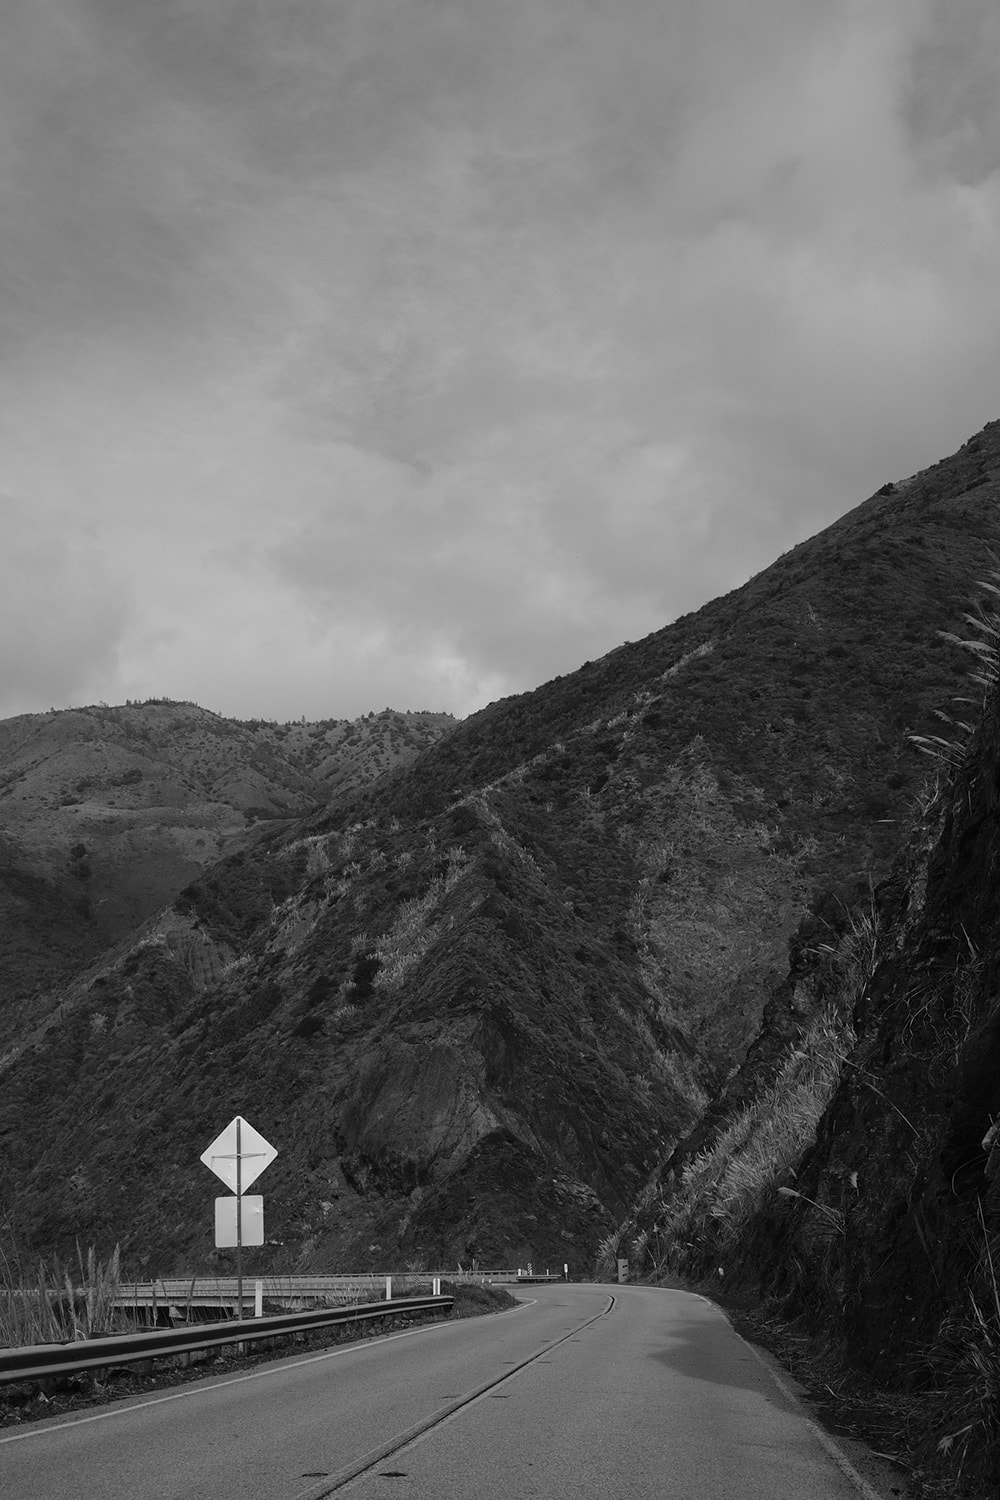 Black and white portrait photo of the Pacific Coast Highway winding through mountain canyons.